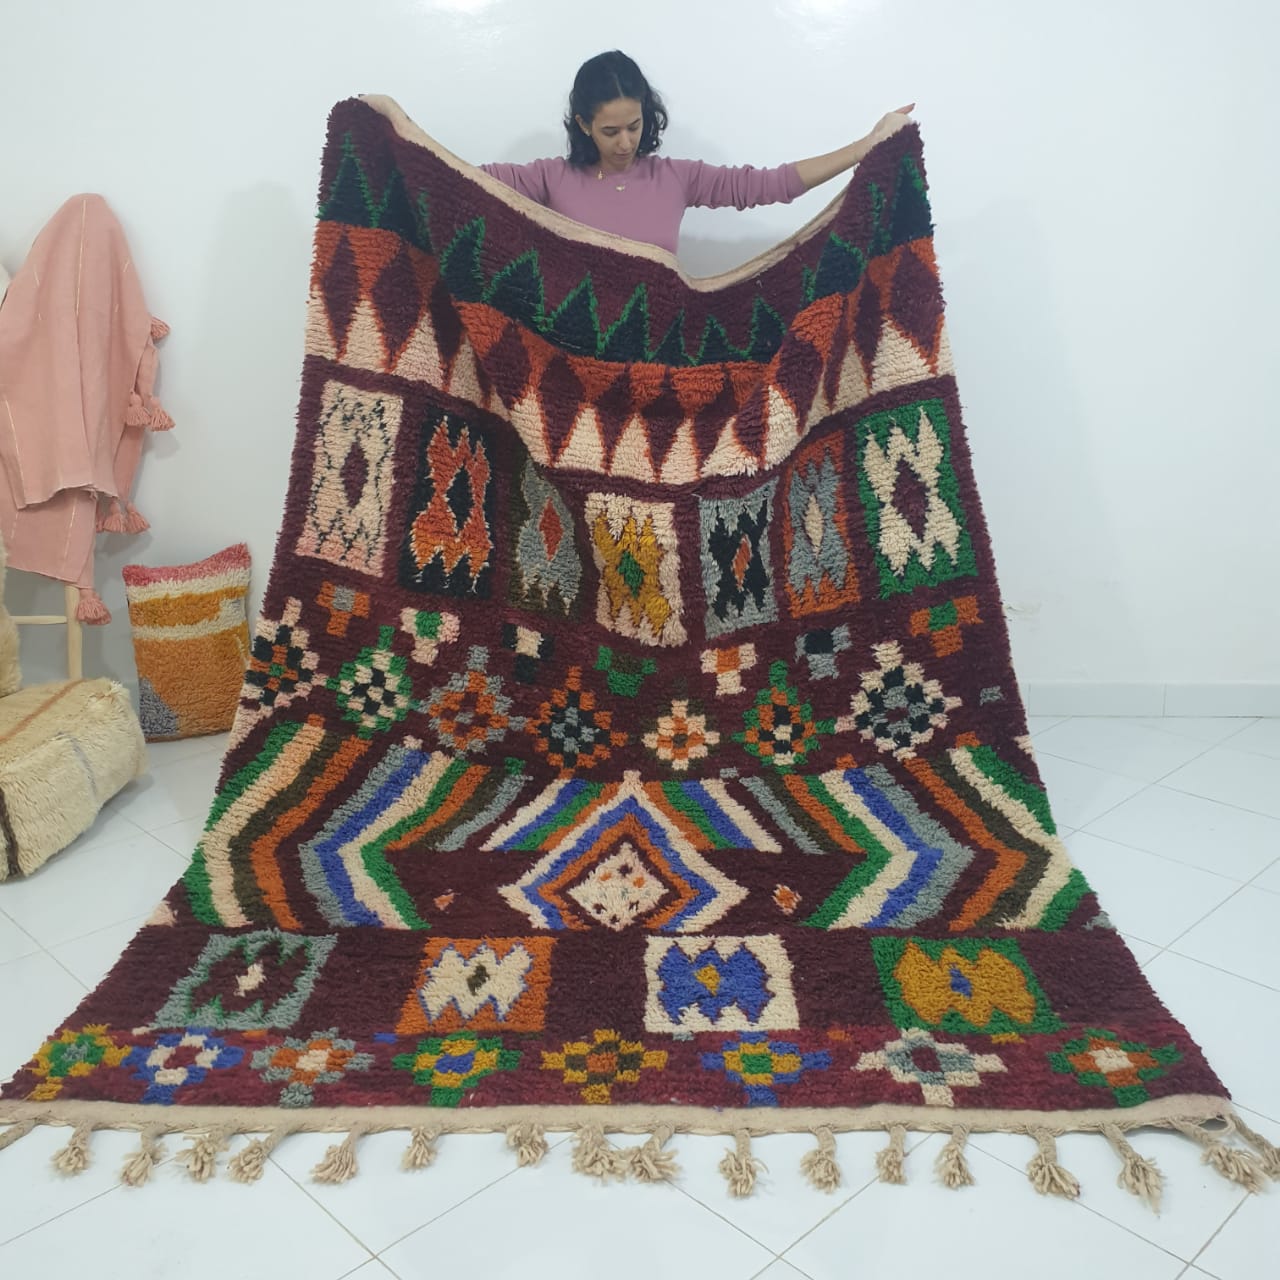 Customized GHIWLA | 9'5x6'7 Ft | 2,90x2,00 m | Moroccan Colorful Rug | 100% wool handmade - OunizZ